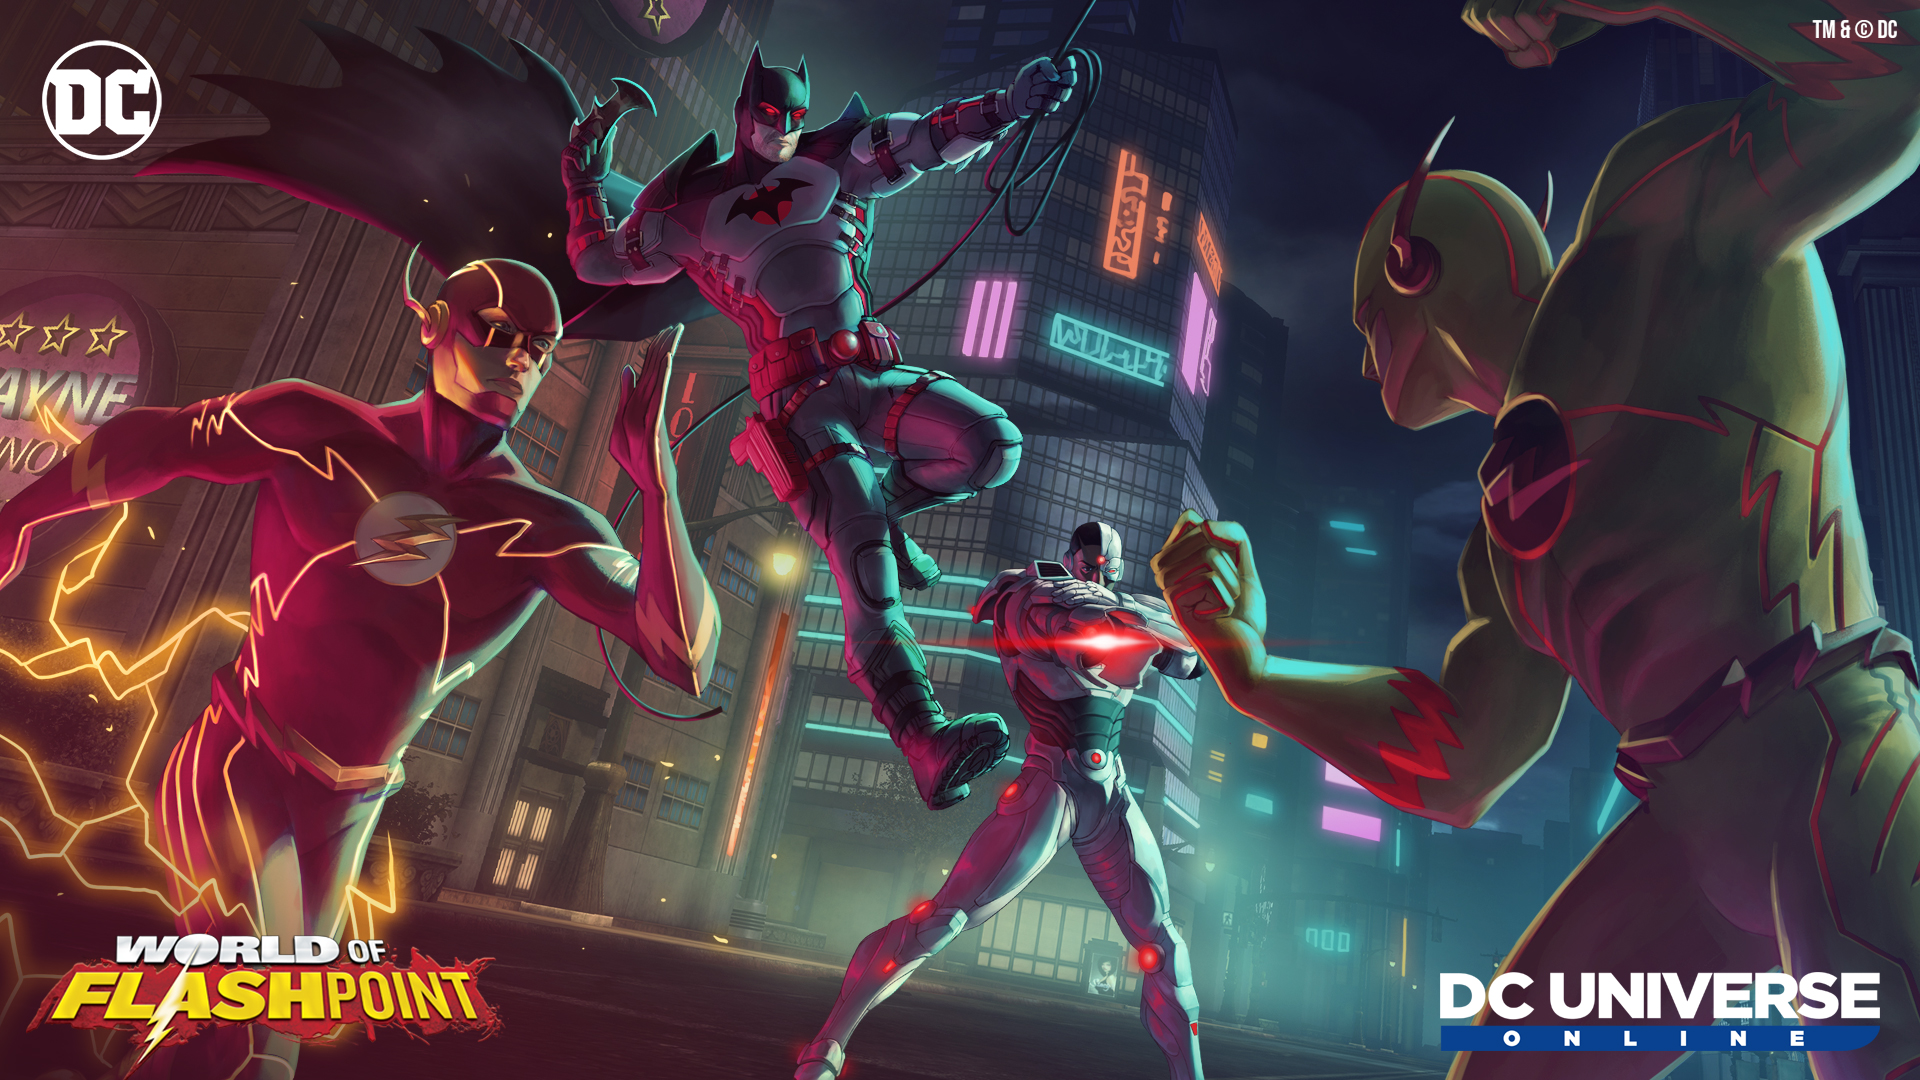 Video For DC Universe Online: Enter the World of Flashpoint